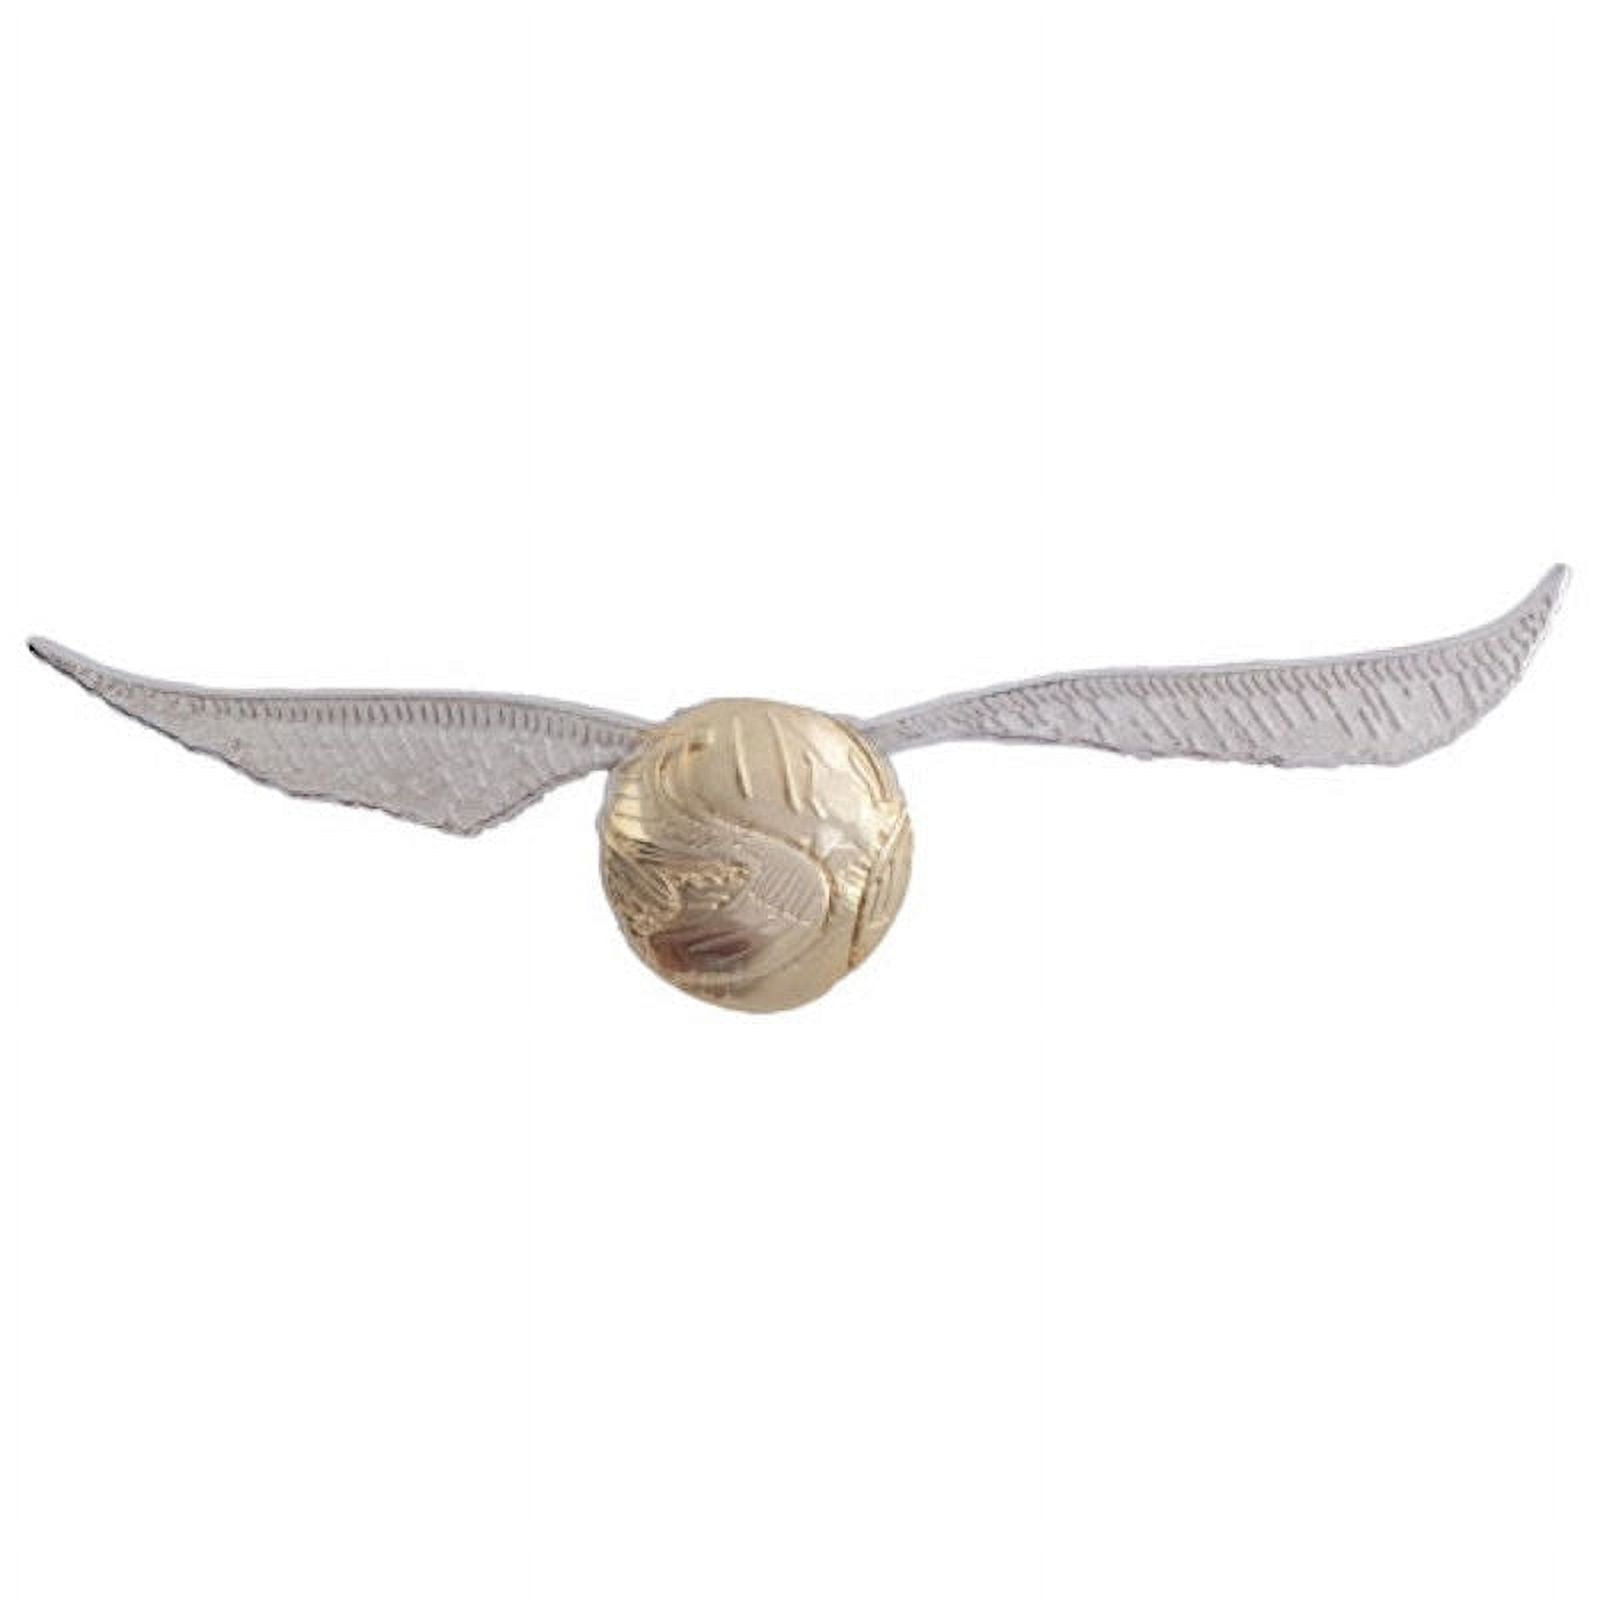 Golden snitch harry potter hi-res stock photography and images - Alamy